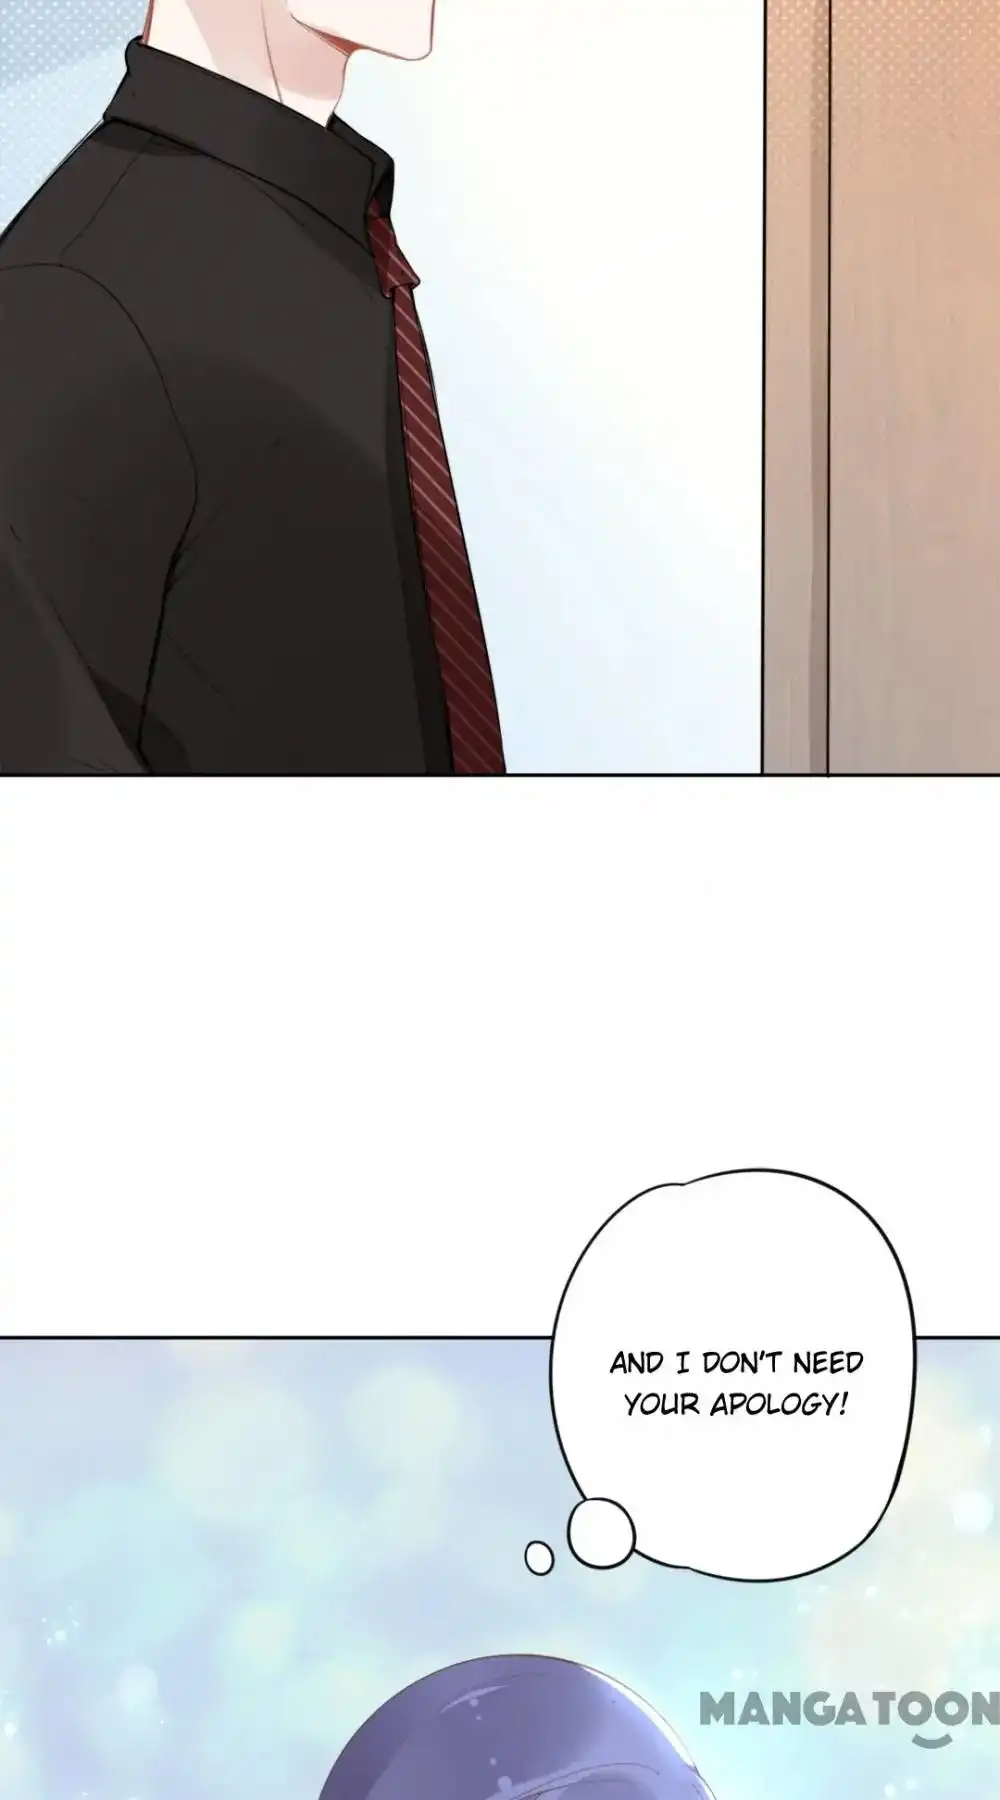 Ceo Quan, You Wife Is Getting Away! Chapter 31